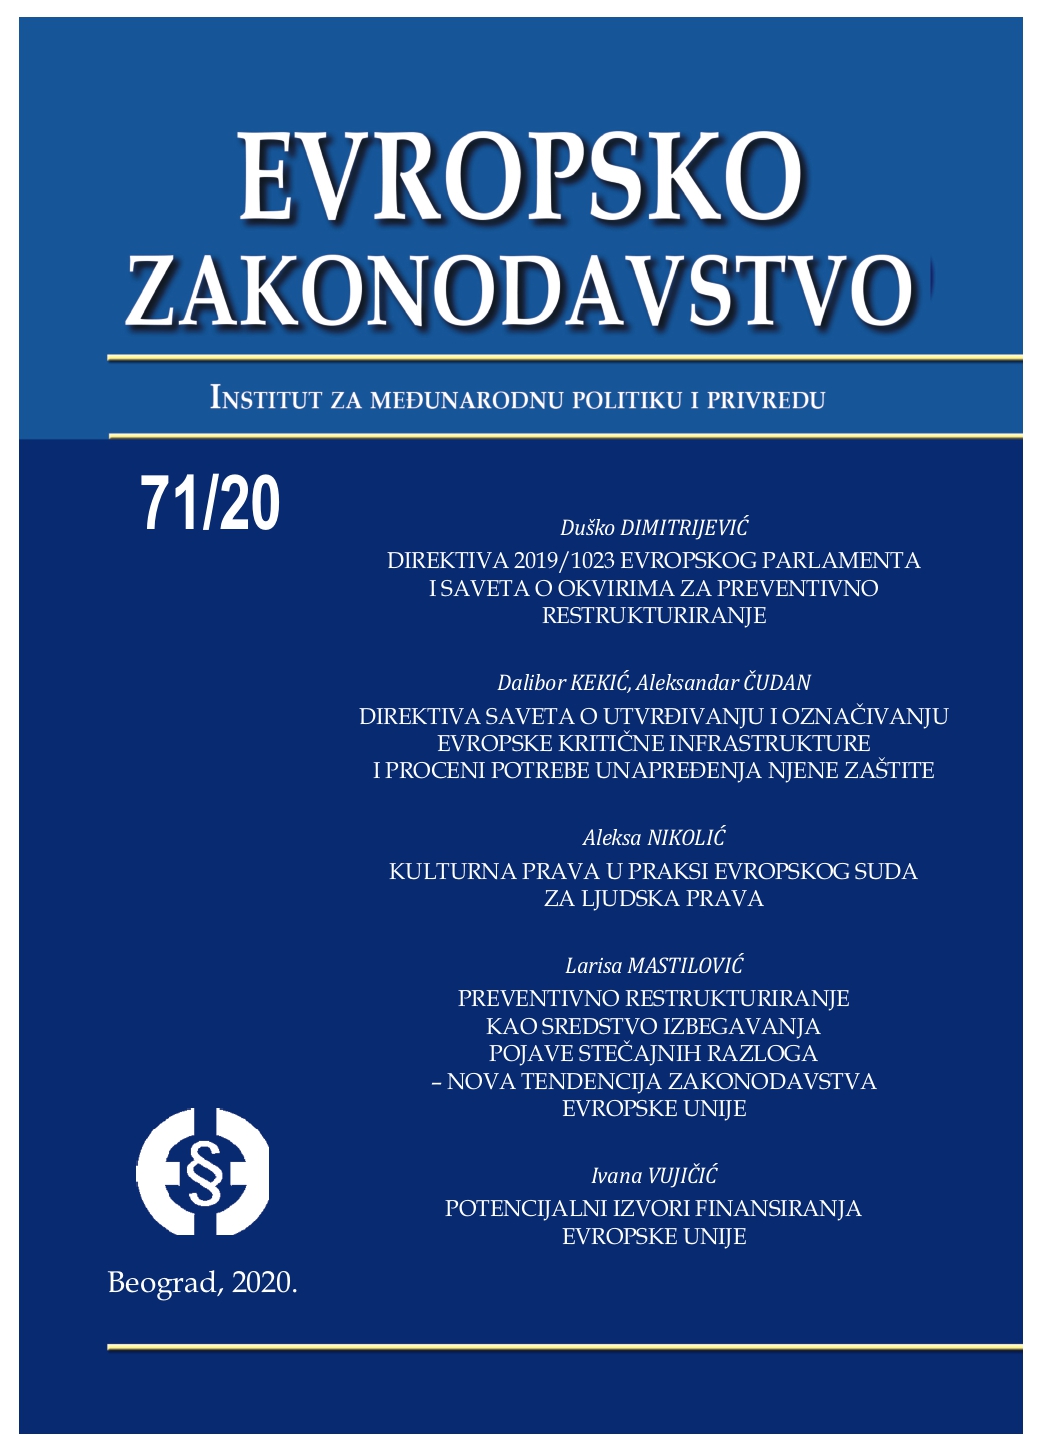 Directive 2019/1023 of the European Parliament and of the Council on the preventive restructuring frameworks Cover Image